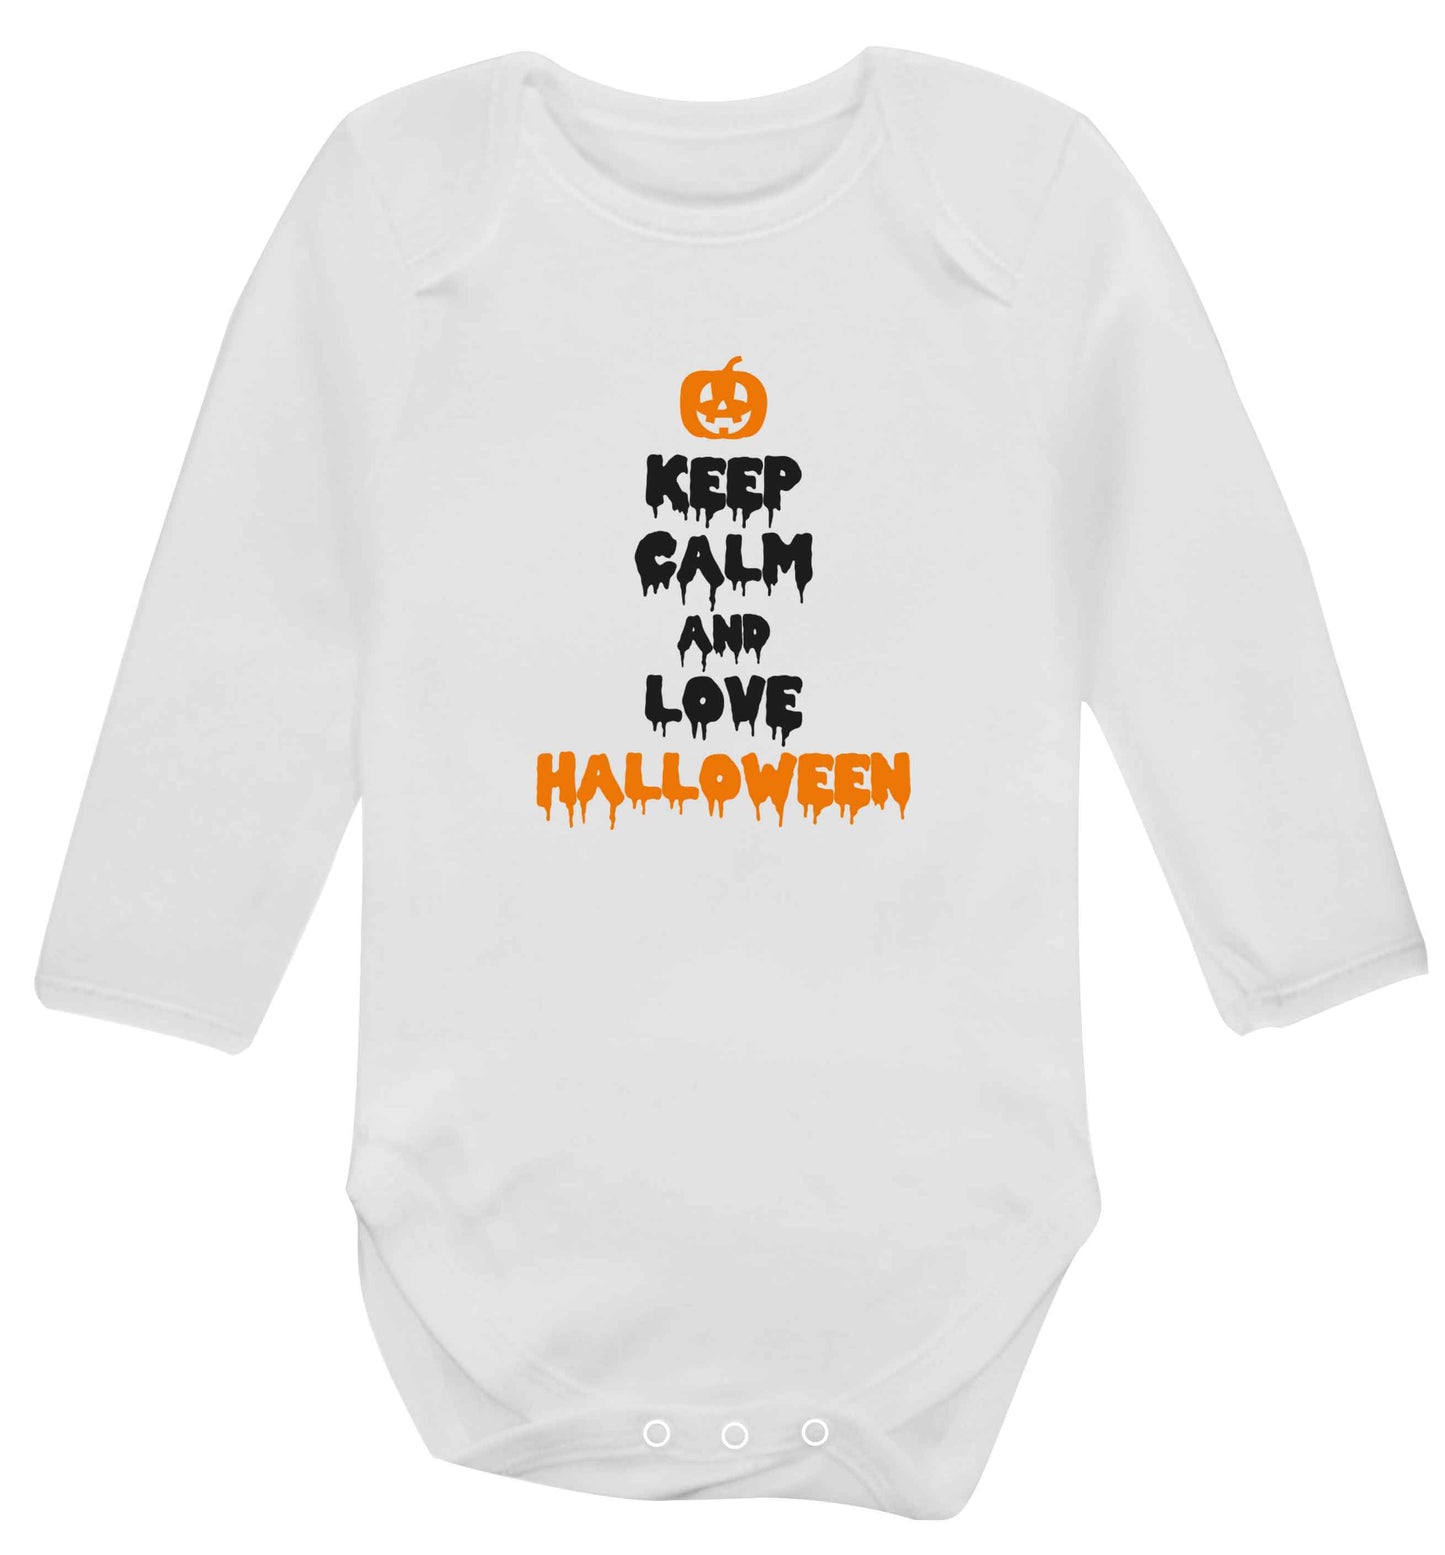 Keep calm and love halloween baby vest long sleeved white 6-12 months